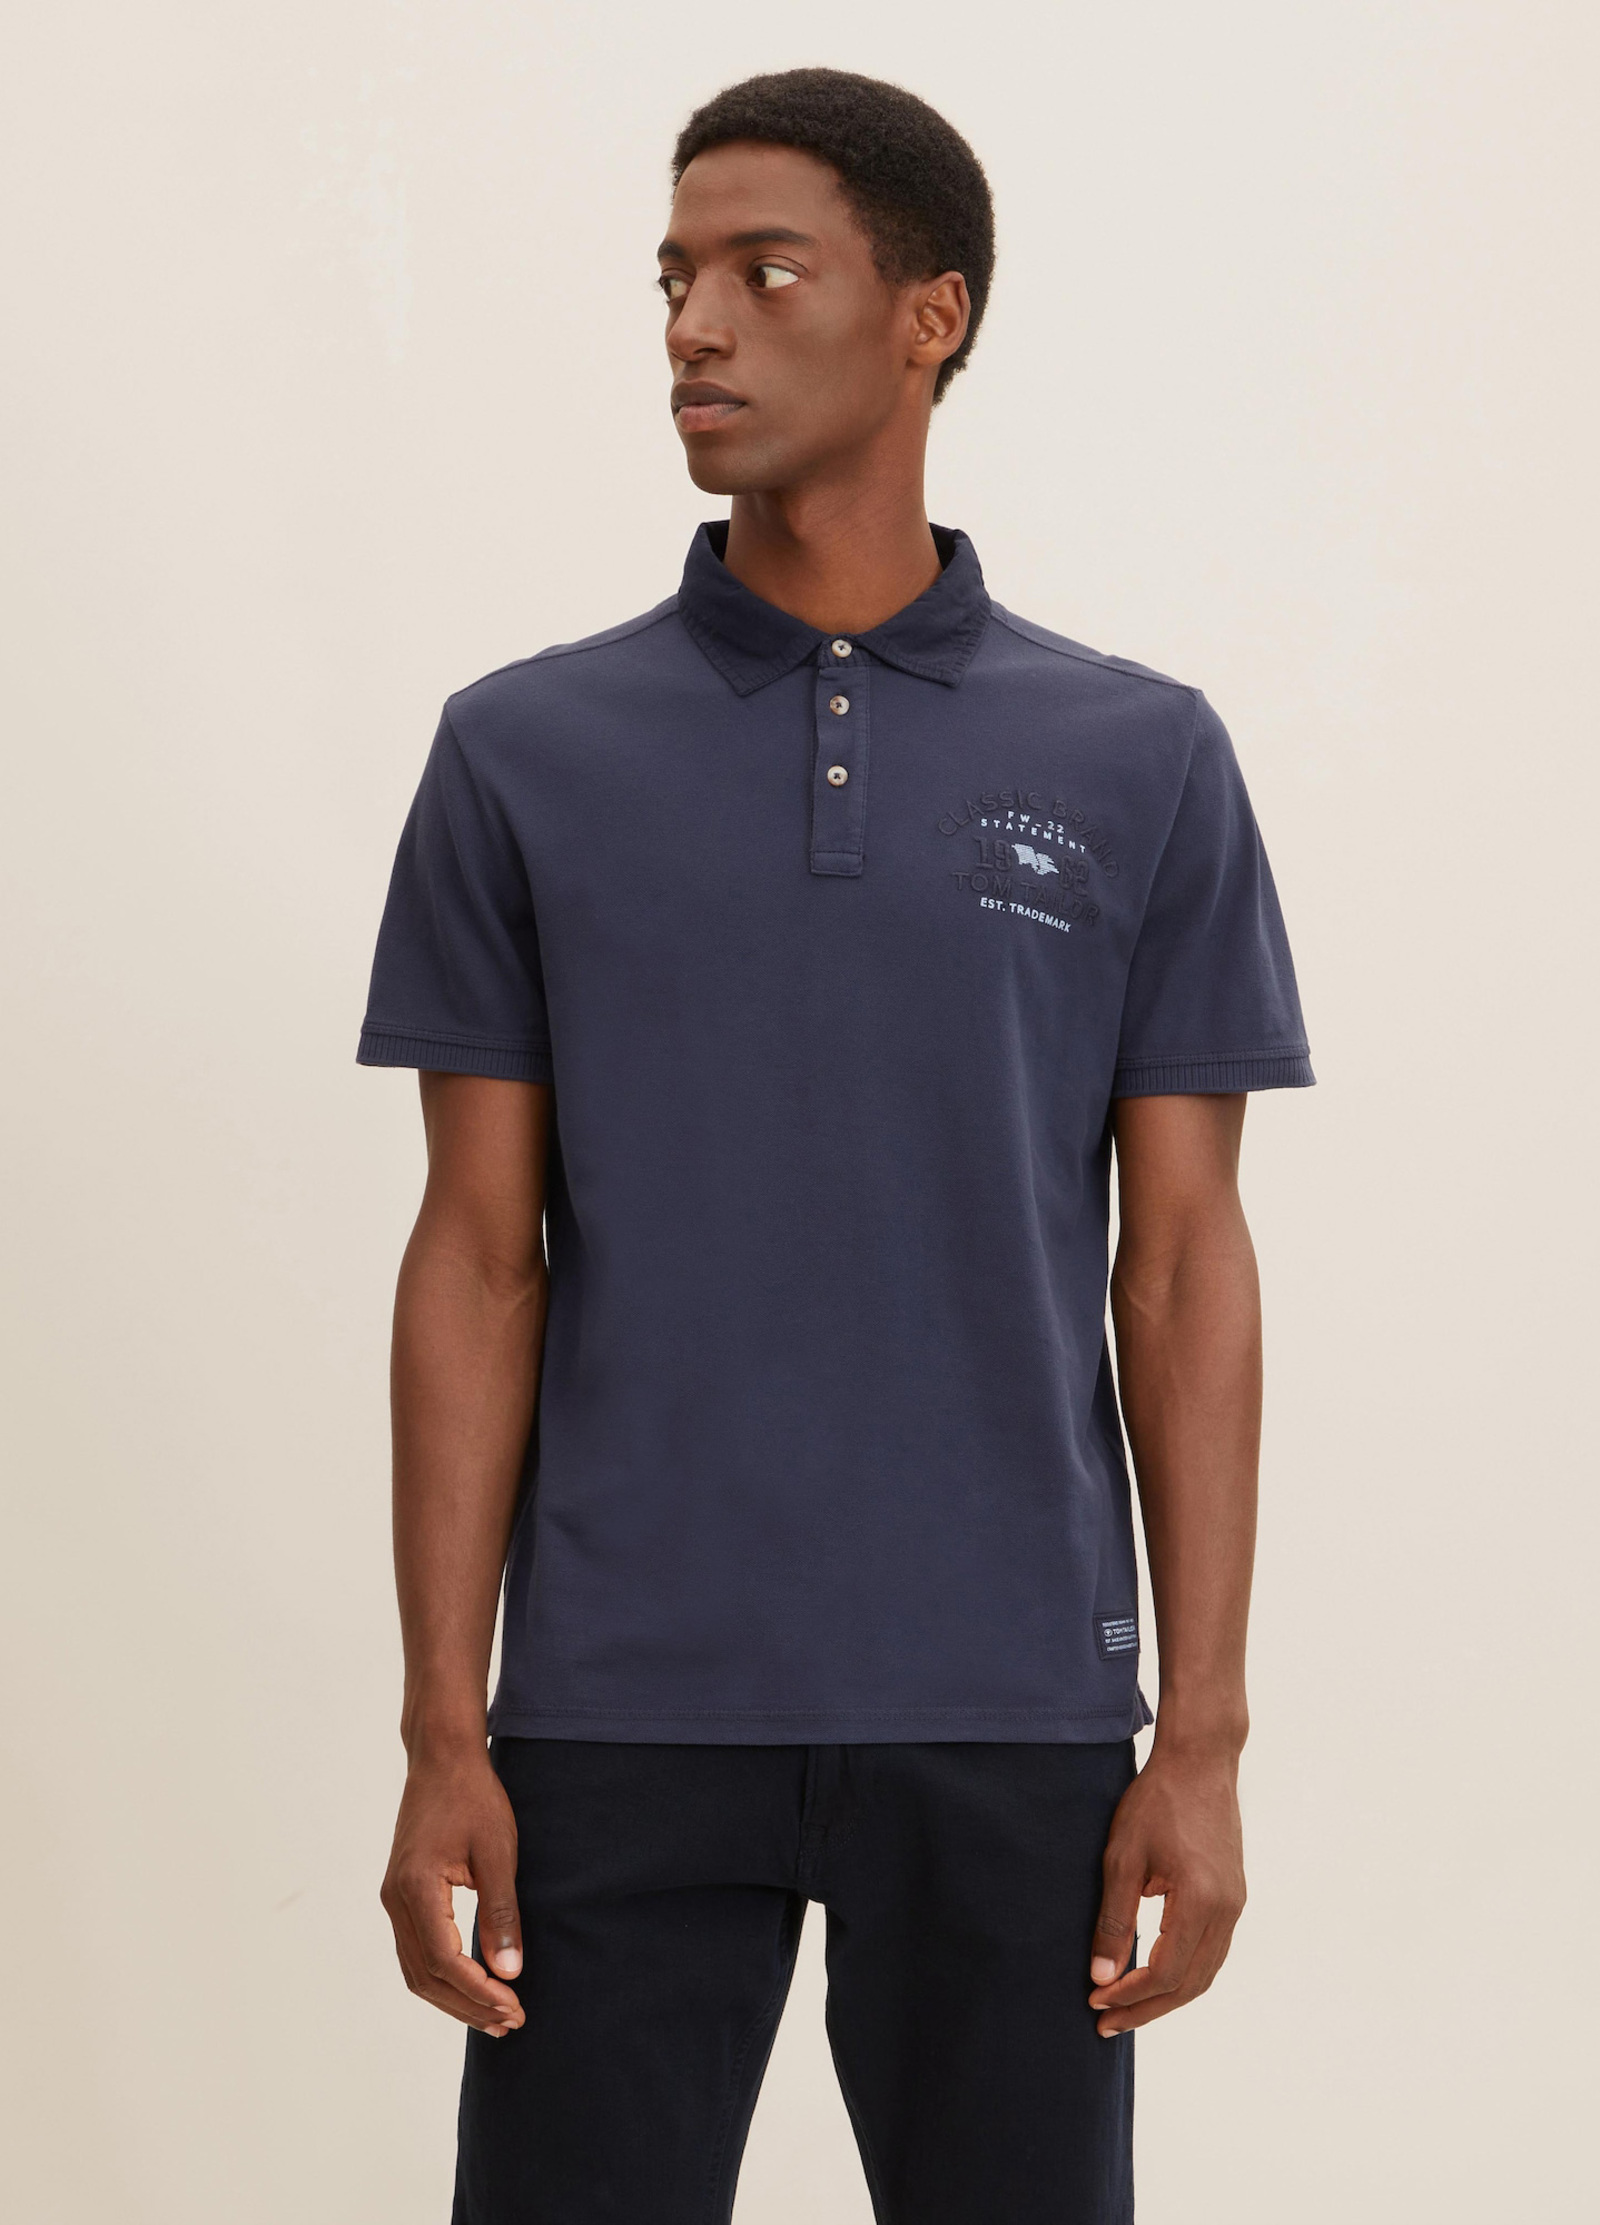 Tom Tailor® logo L with Captain embroidery Sky shirt Size Polo - Blue